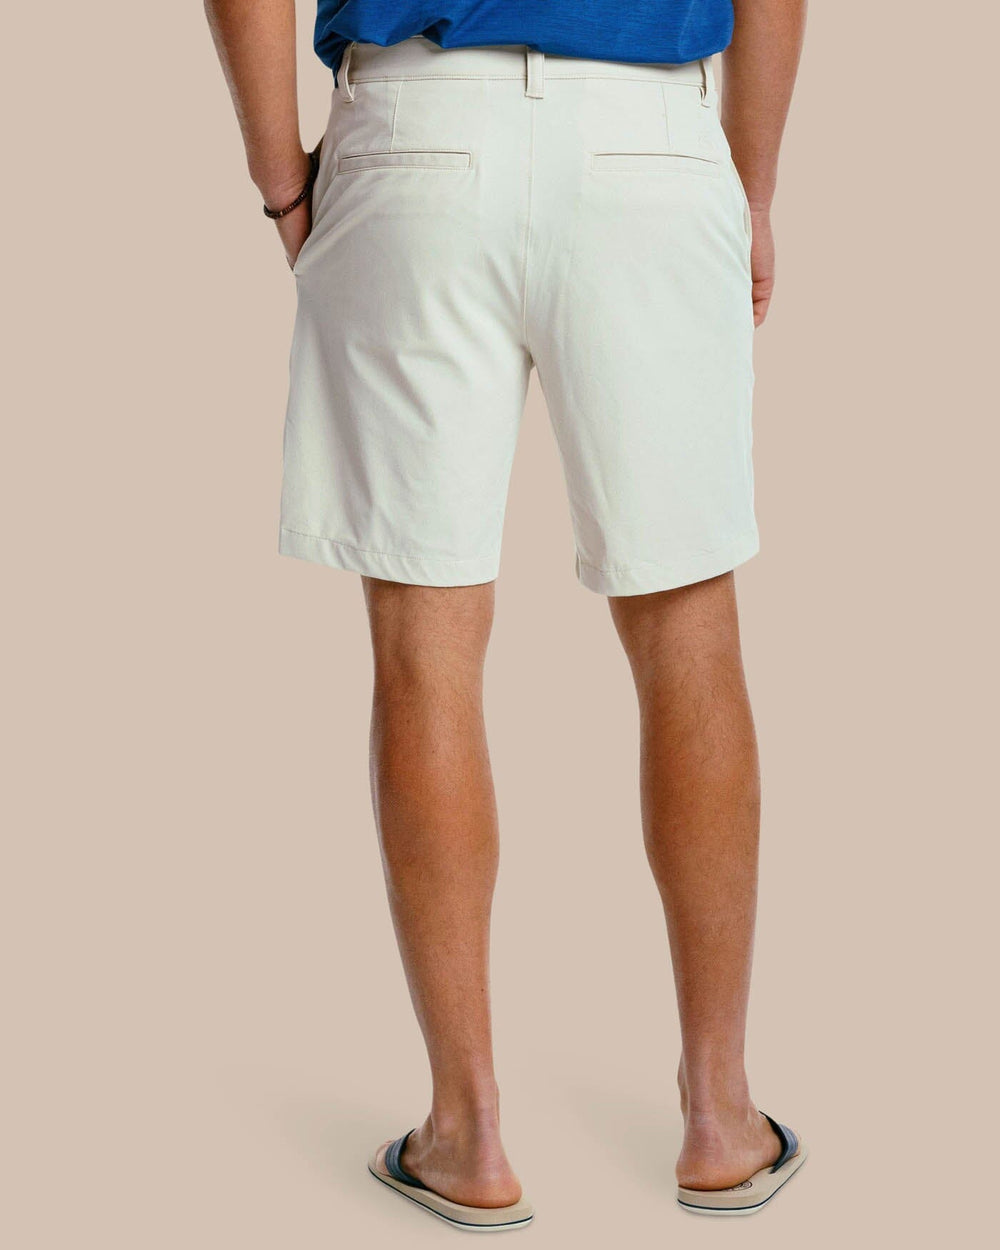 The back of the Men's Gulf 8 Inch Brrr Performance Short by Southern Tide - Stone